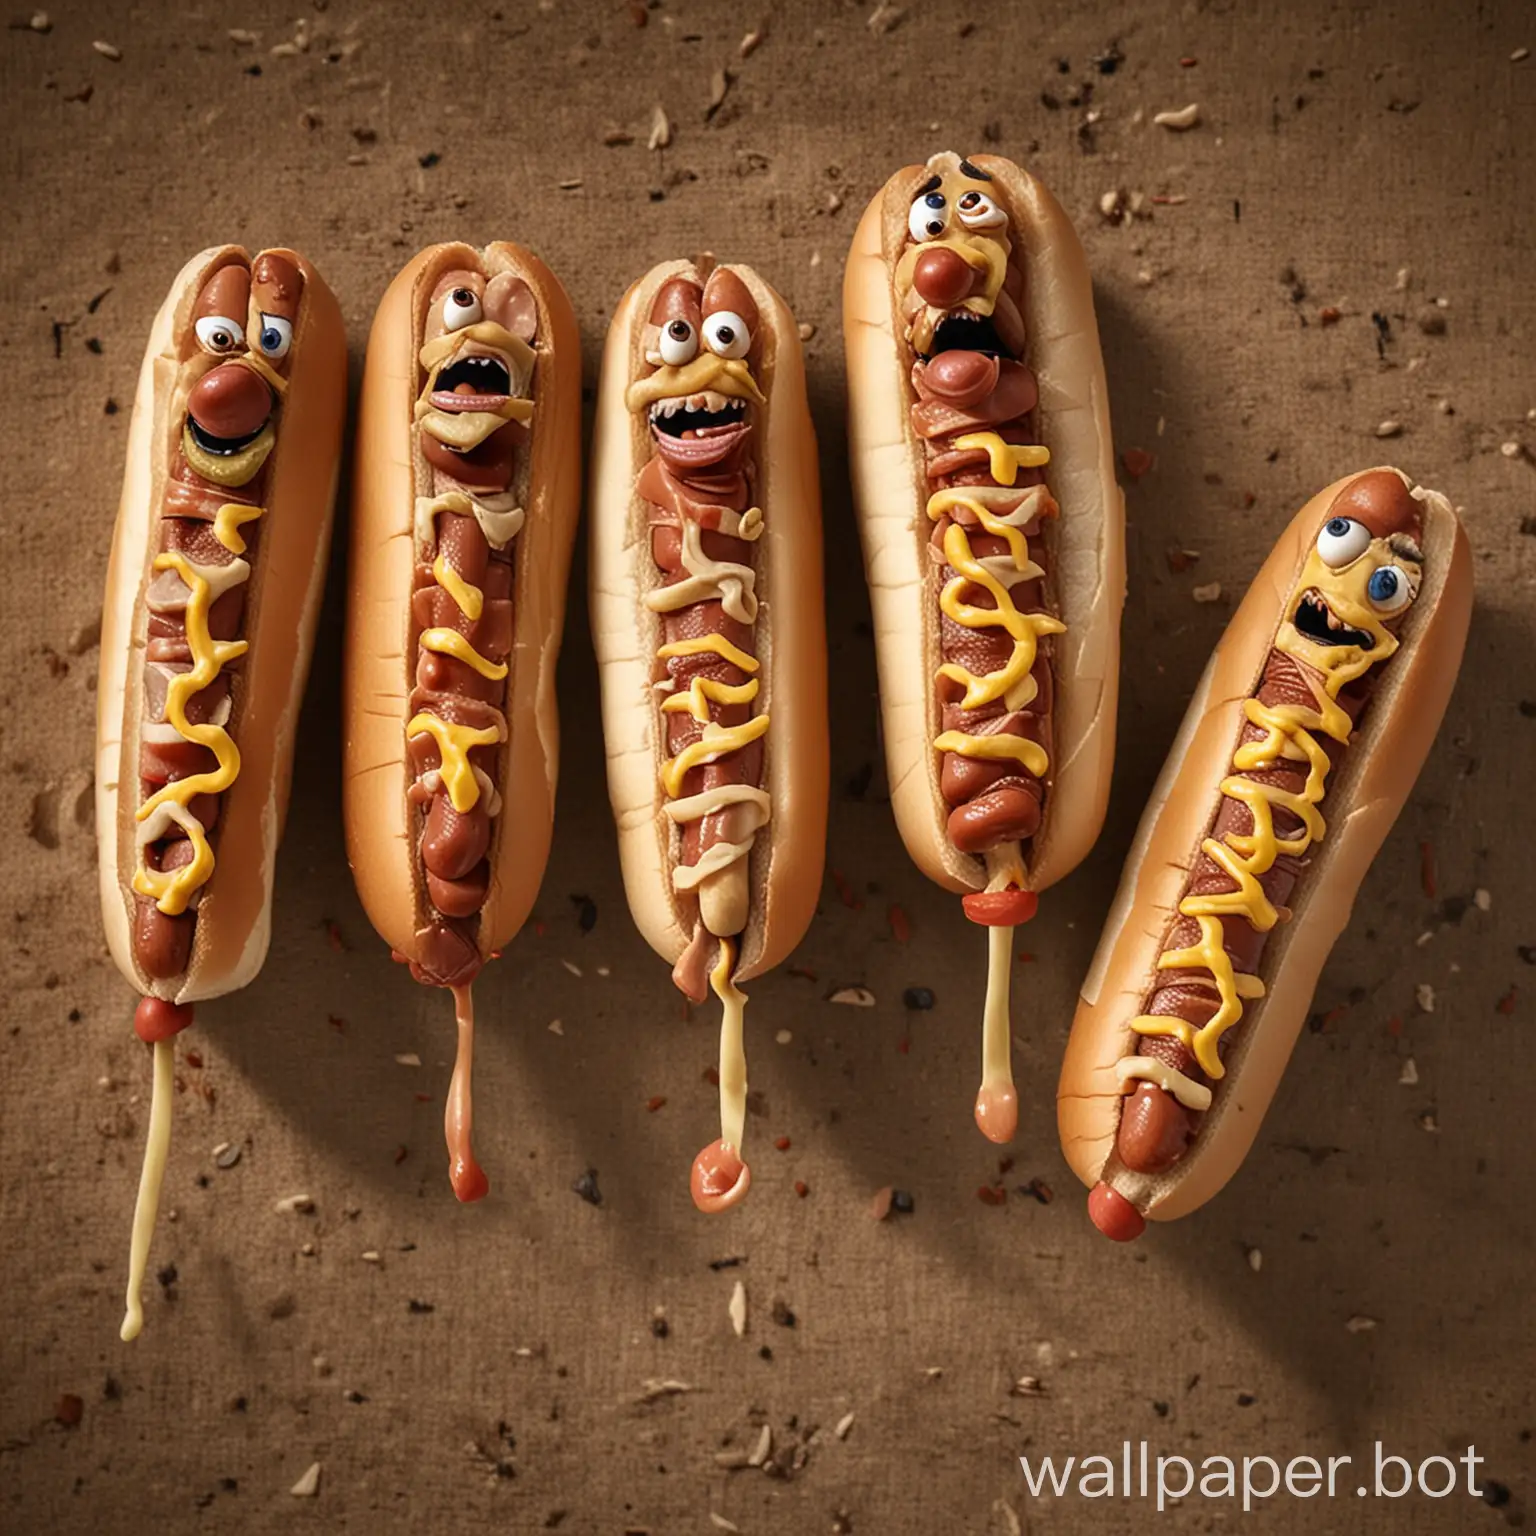 family of hotdogs without a dog face but with a hotdog face. The family of hotdogs have arms and legs with facial expressions of being scared. They are located in Erbil Iraq running from a U.S Army Green Beret Soldier who looks like tim kennedy that is trying to eat the family of hotdogs